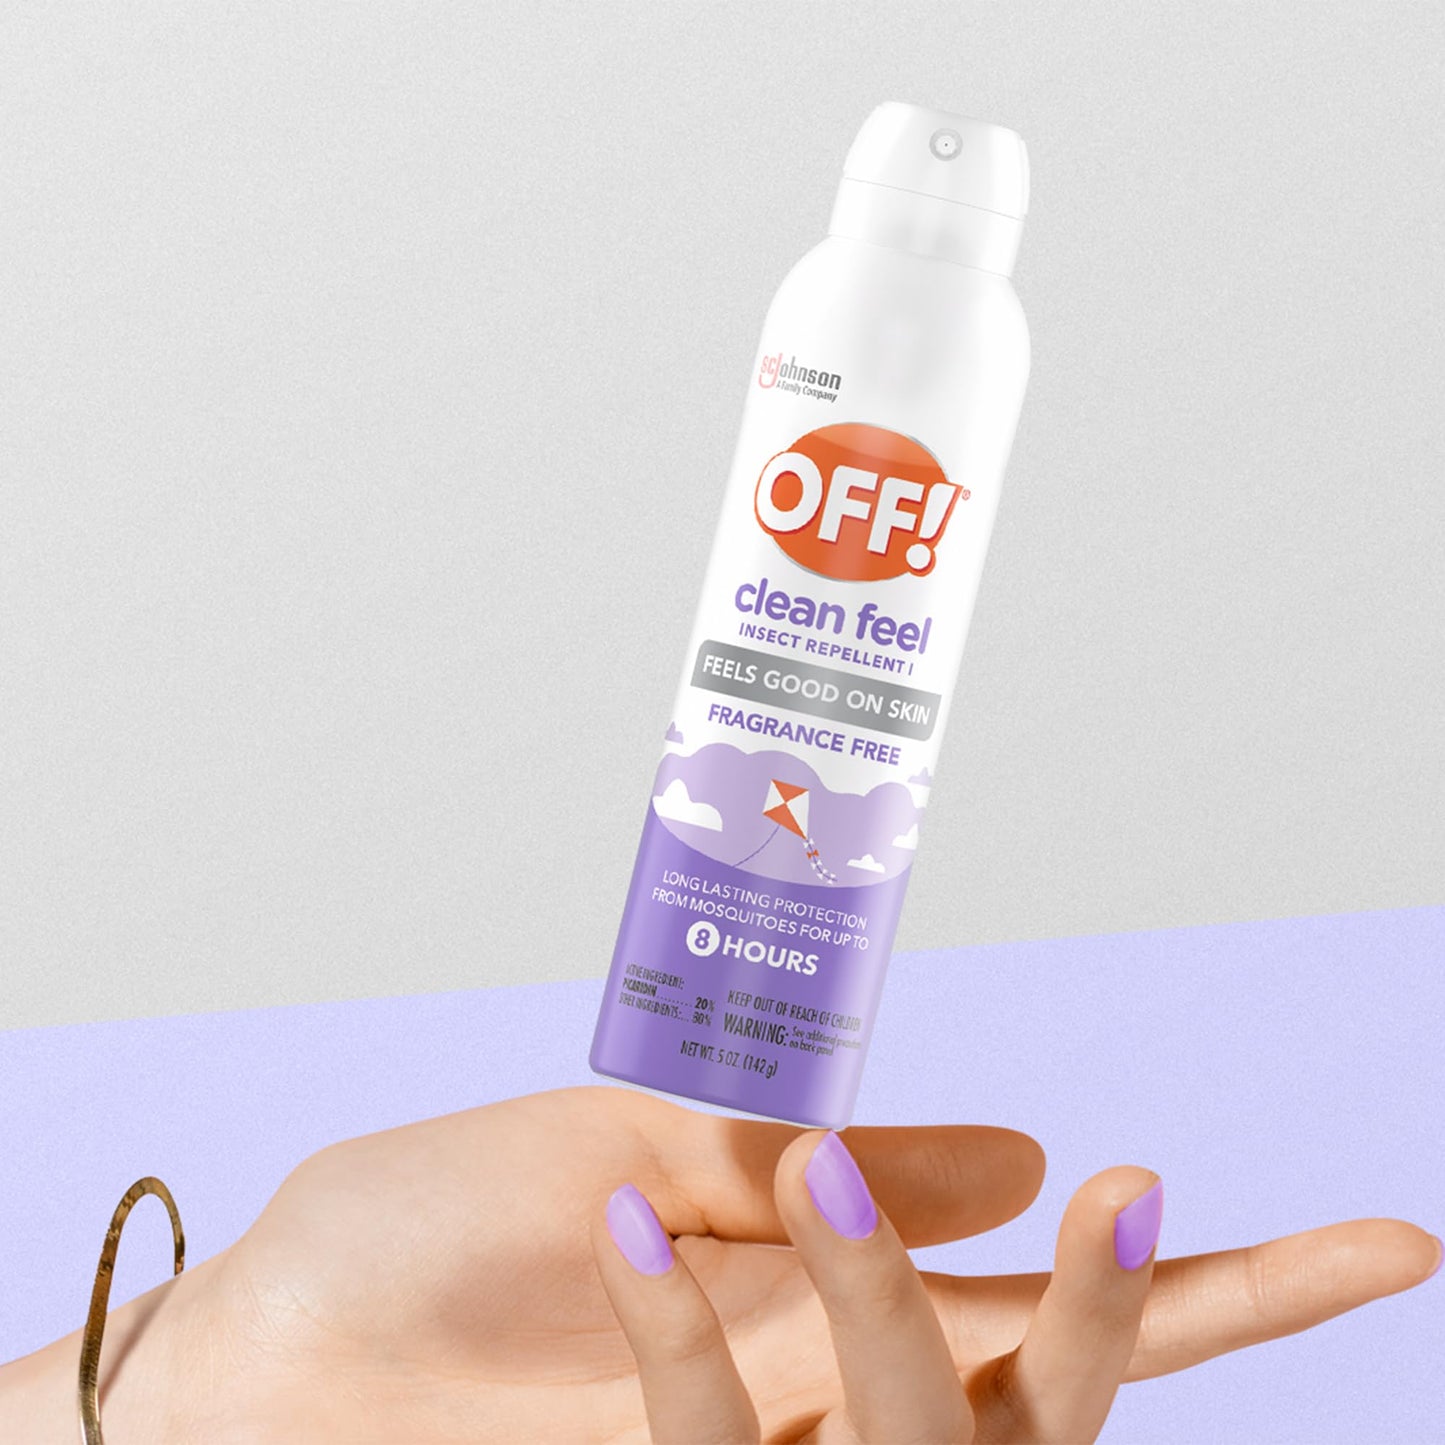 OFF! Clean Feel Insect Repellent Aerosol with 20% Picaridin, Bug Spray with Long Lasting Protection from Mosquitoes, Feels Good on Skin, 5 oz